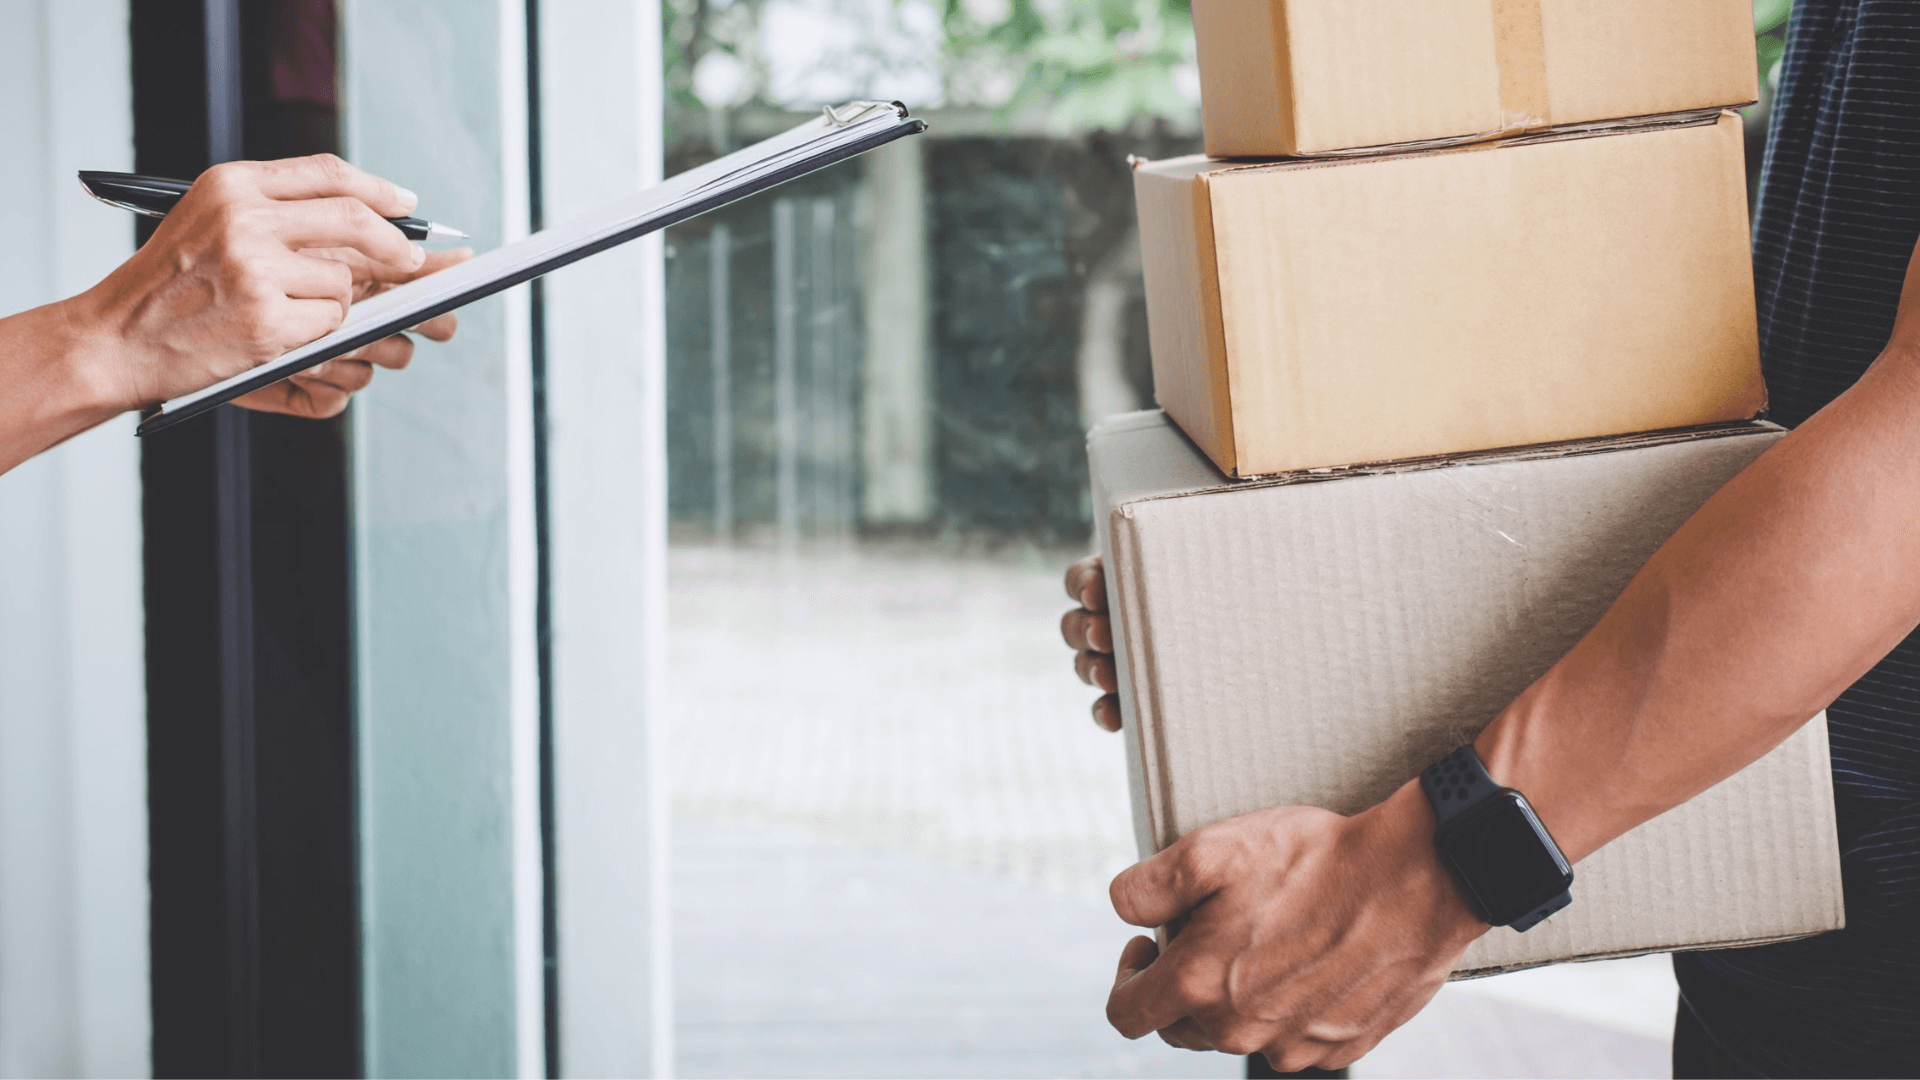 Delivery Companies in the UK: Top 7 Couriers for E-Commerce